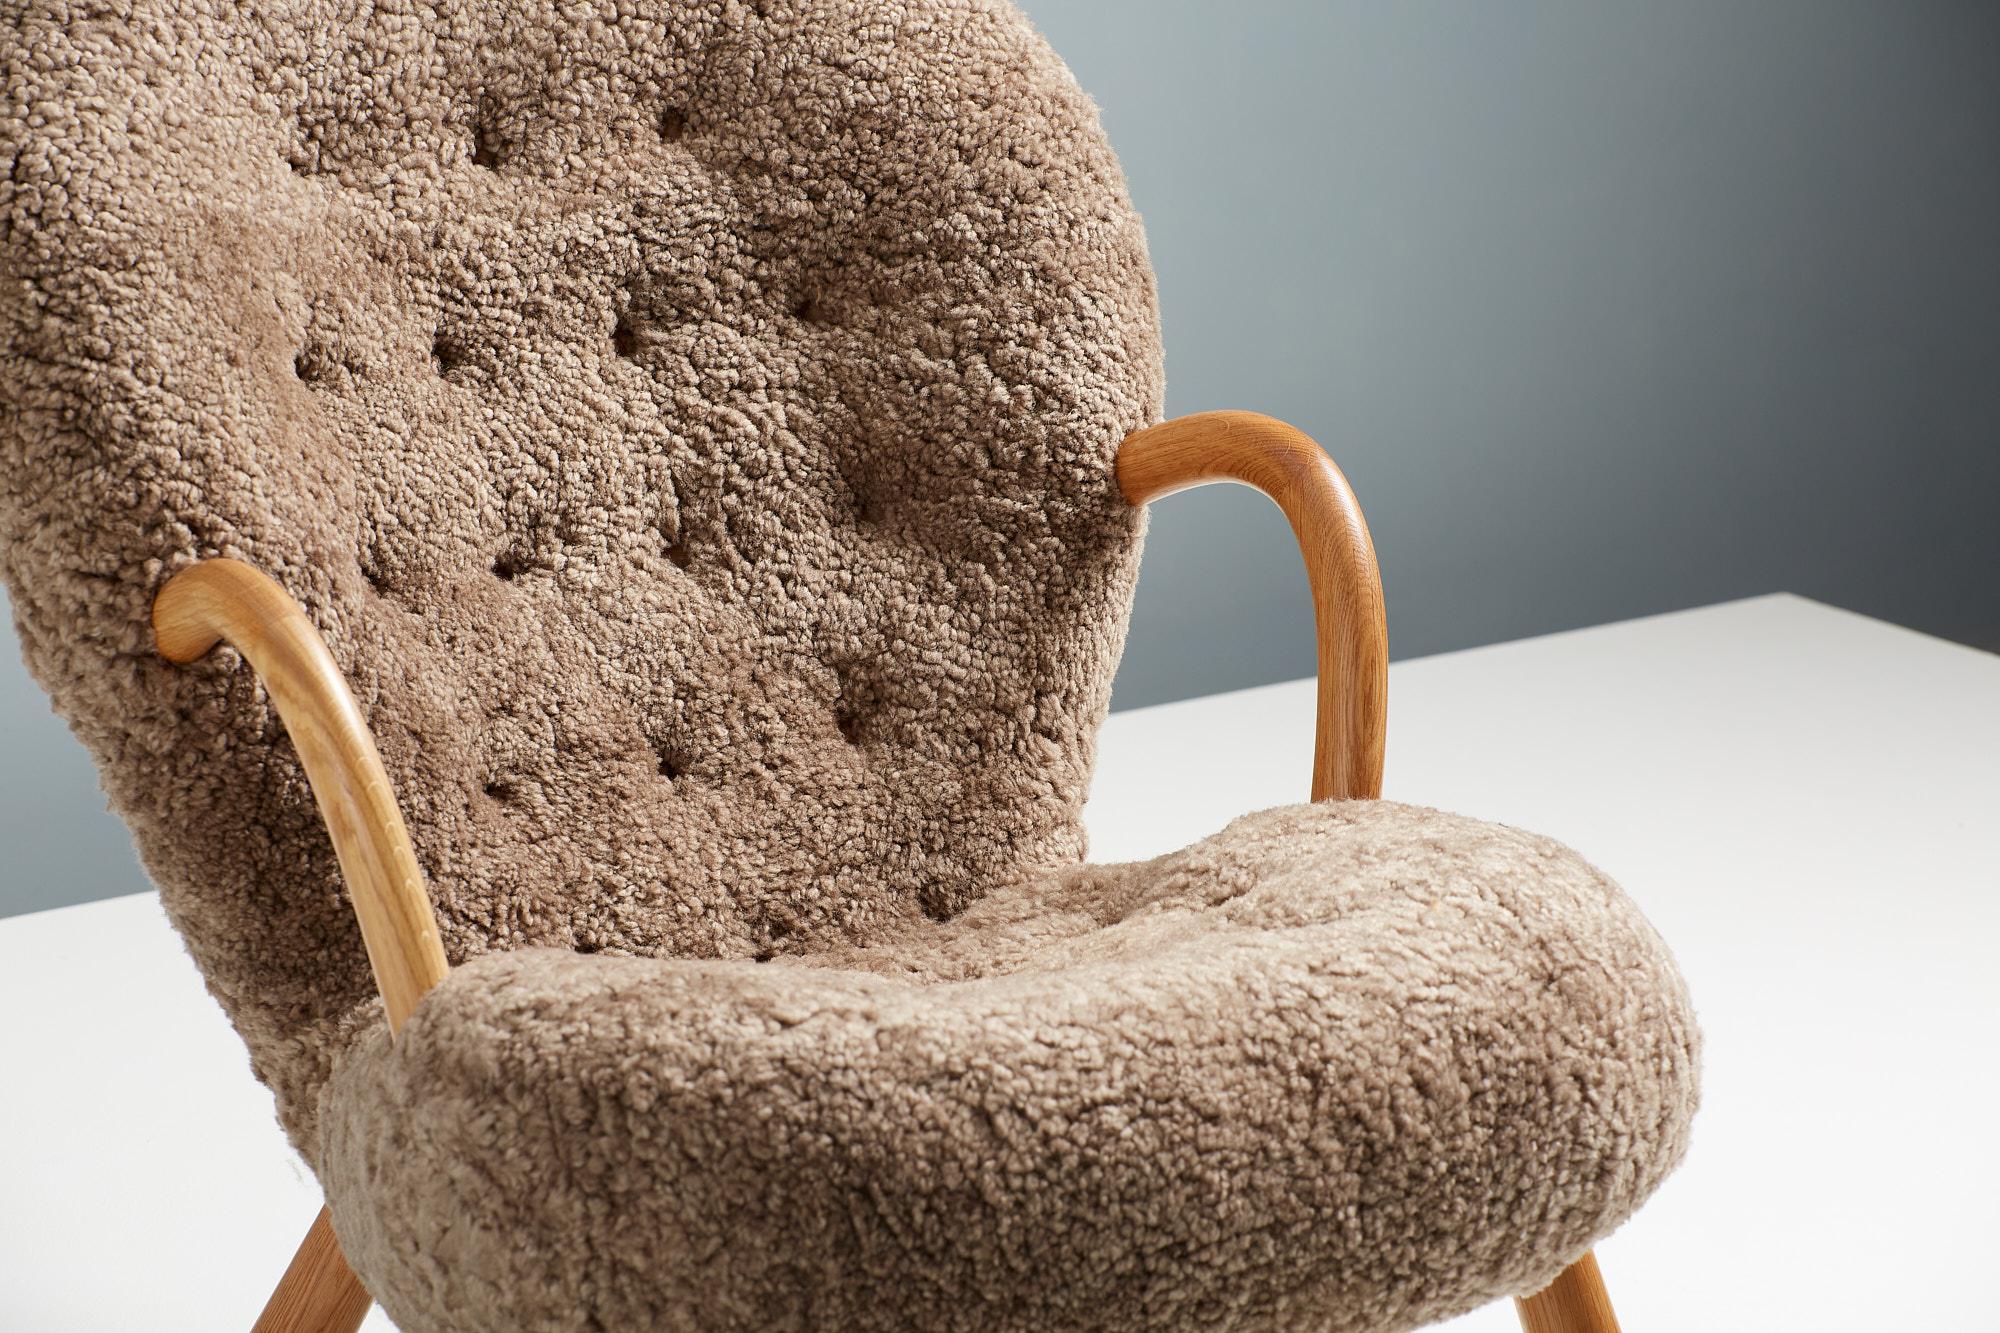 Re-Edition Sheepskin Clam Chair by Arnold Madsen In New Condition For Sale In London, England